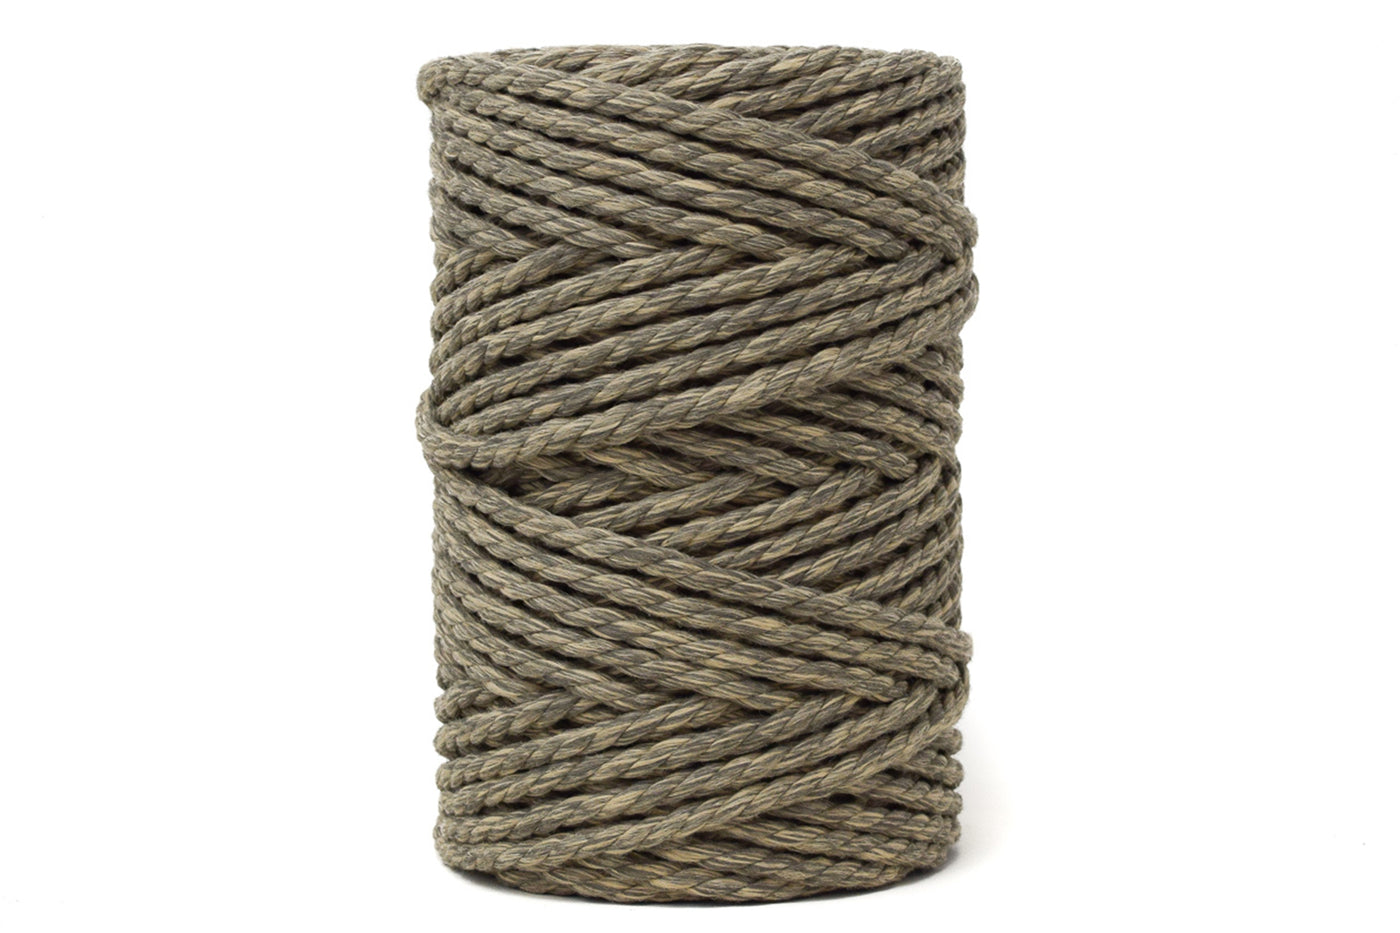 OUTDOORS RECYCLED POLYPROPYLENE ROPE 5 MM - 3 PLY - MOCHA MIX COLOR